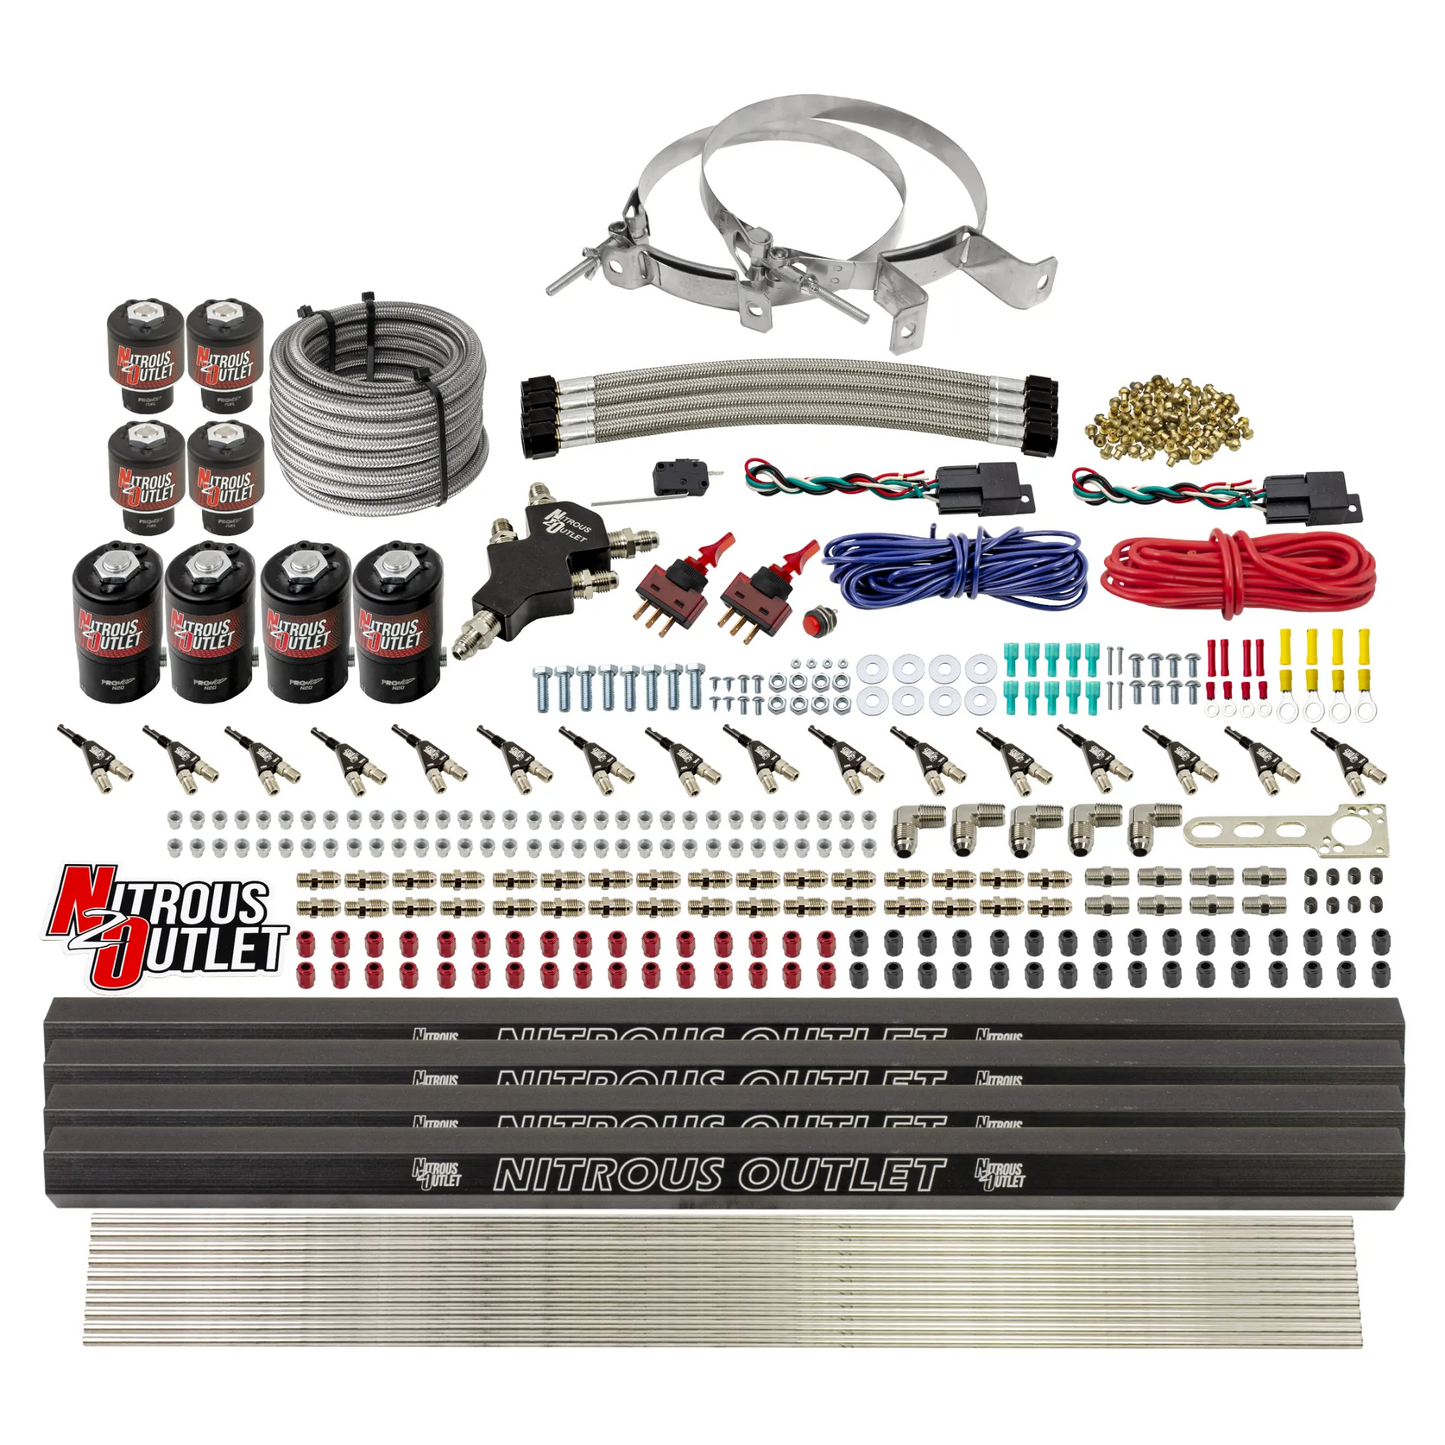 8 Cylinder Dual Stage Direct Port Nitrous System with Injection Rails - Gas - .112 Nitrous/ .177 Fuel - 45-55 PSI